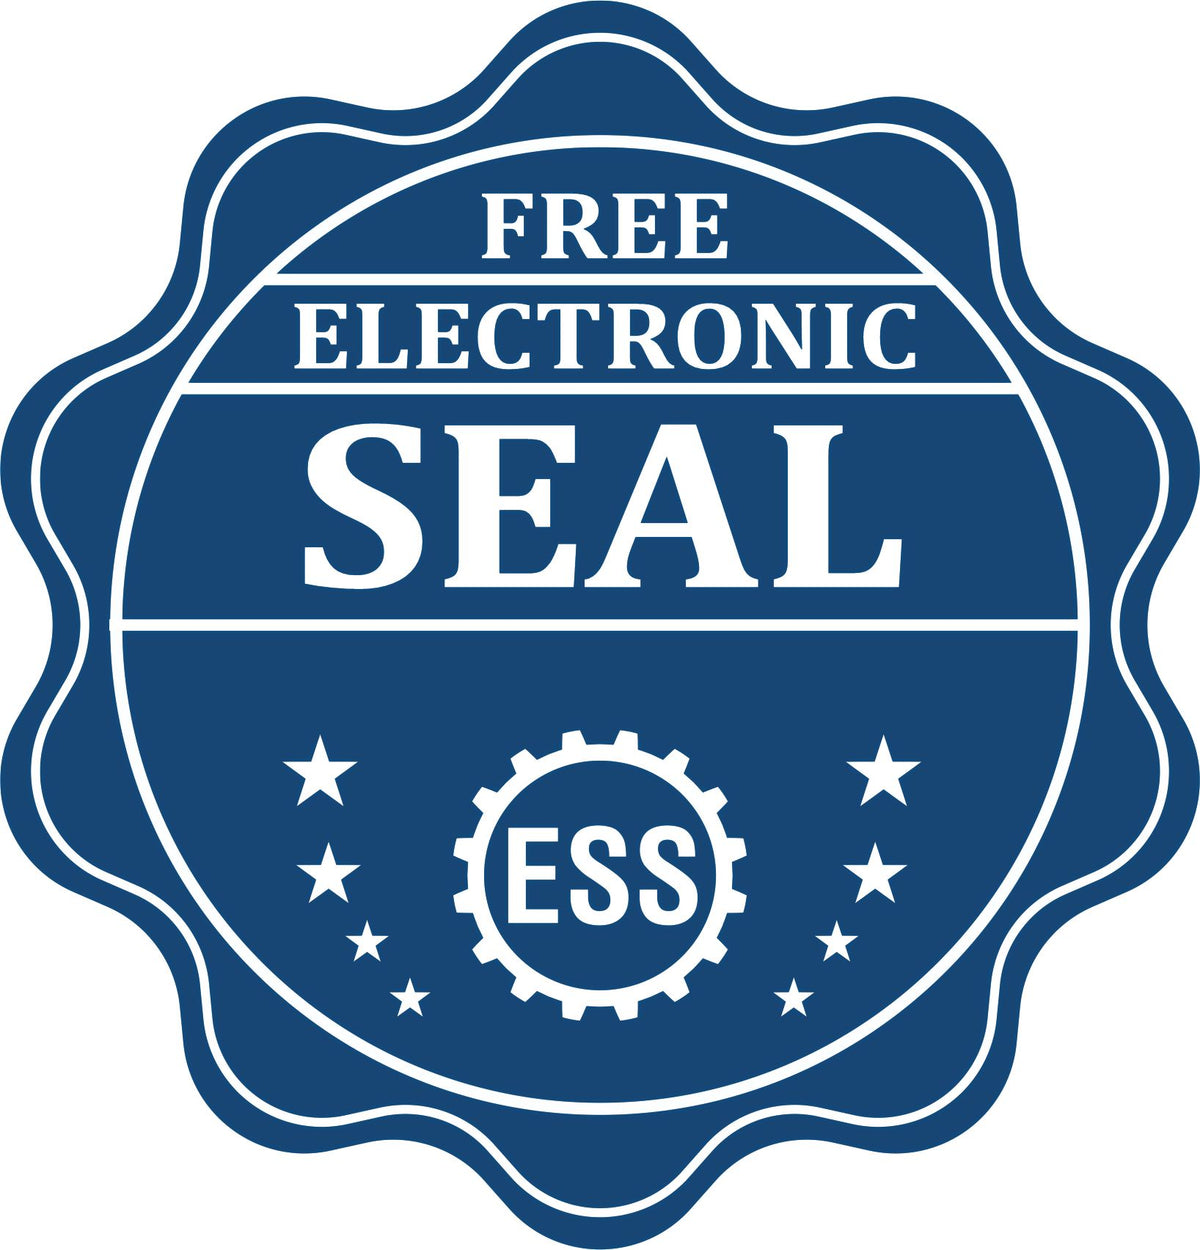 A badge showing a free electronic seal for the Handheld Alabama Land Surveyor Seal with stars and the ESS gear on the emblem.